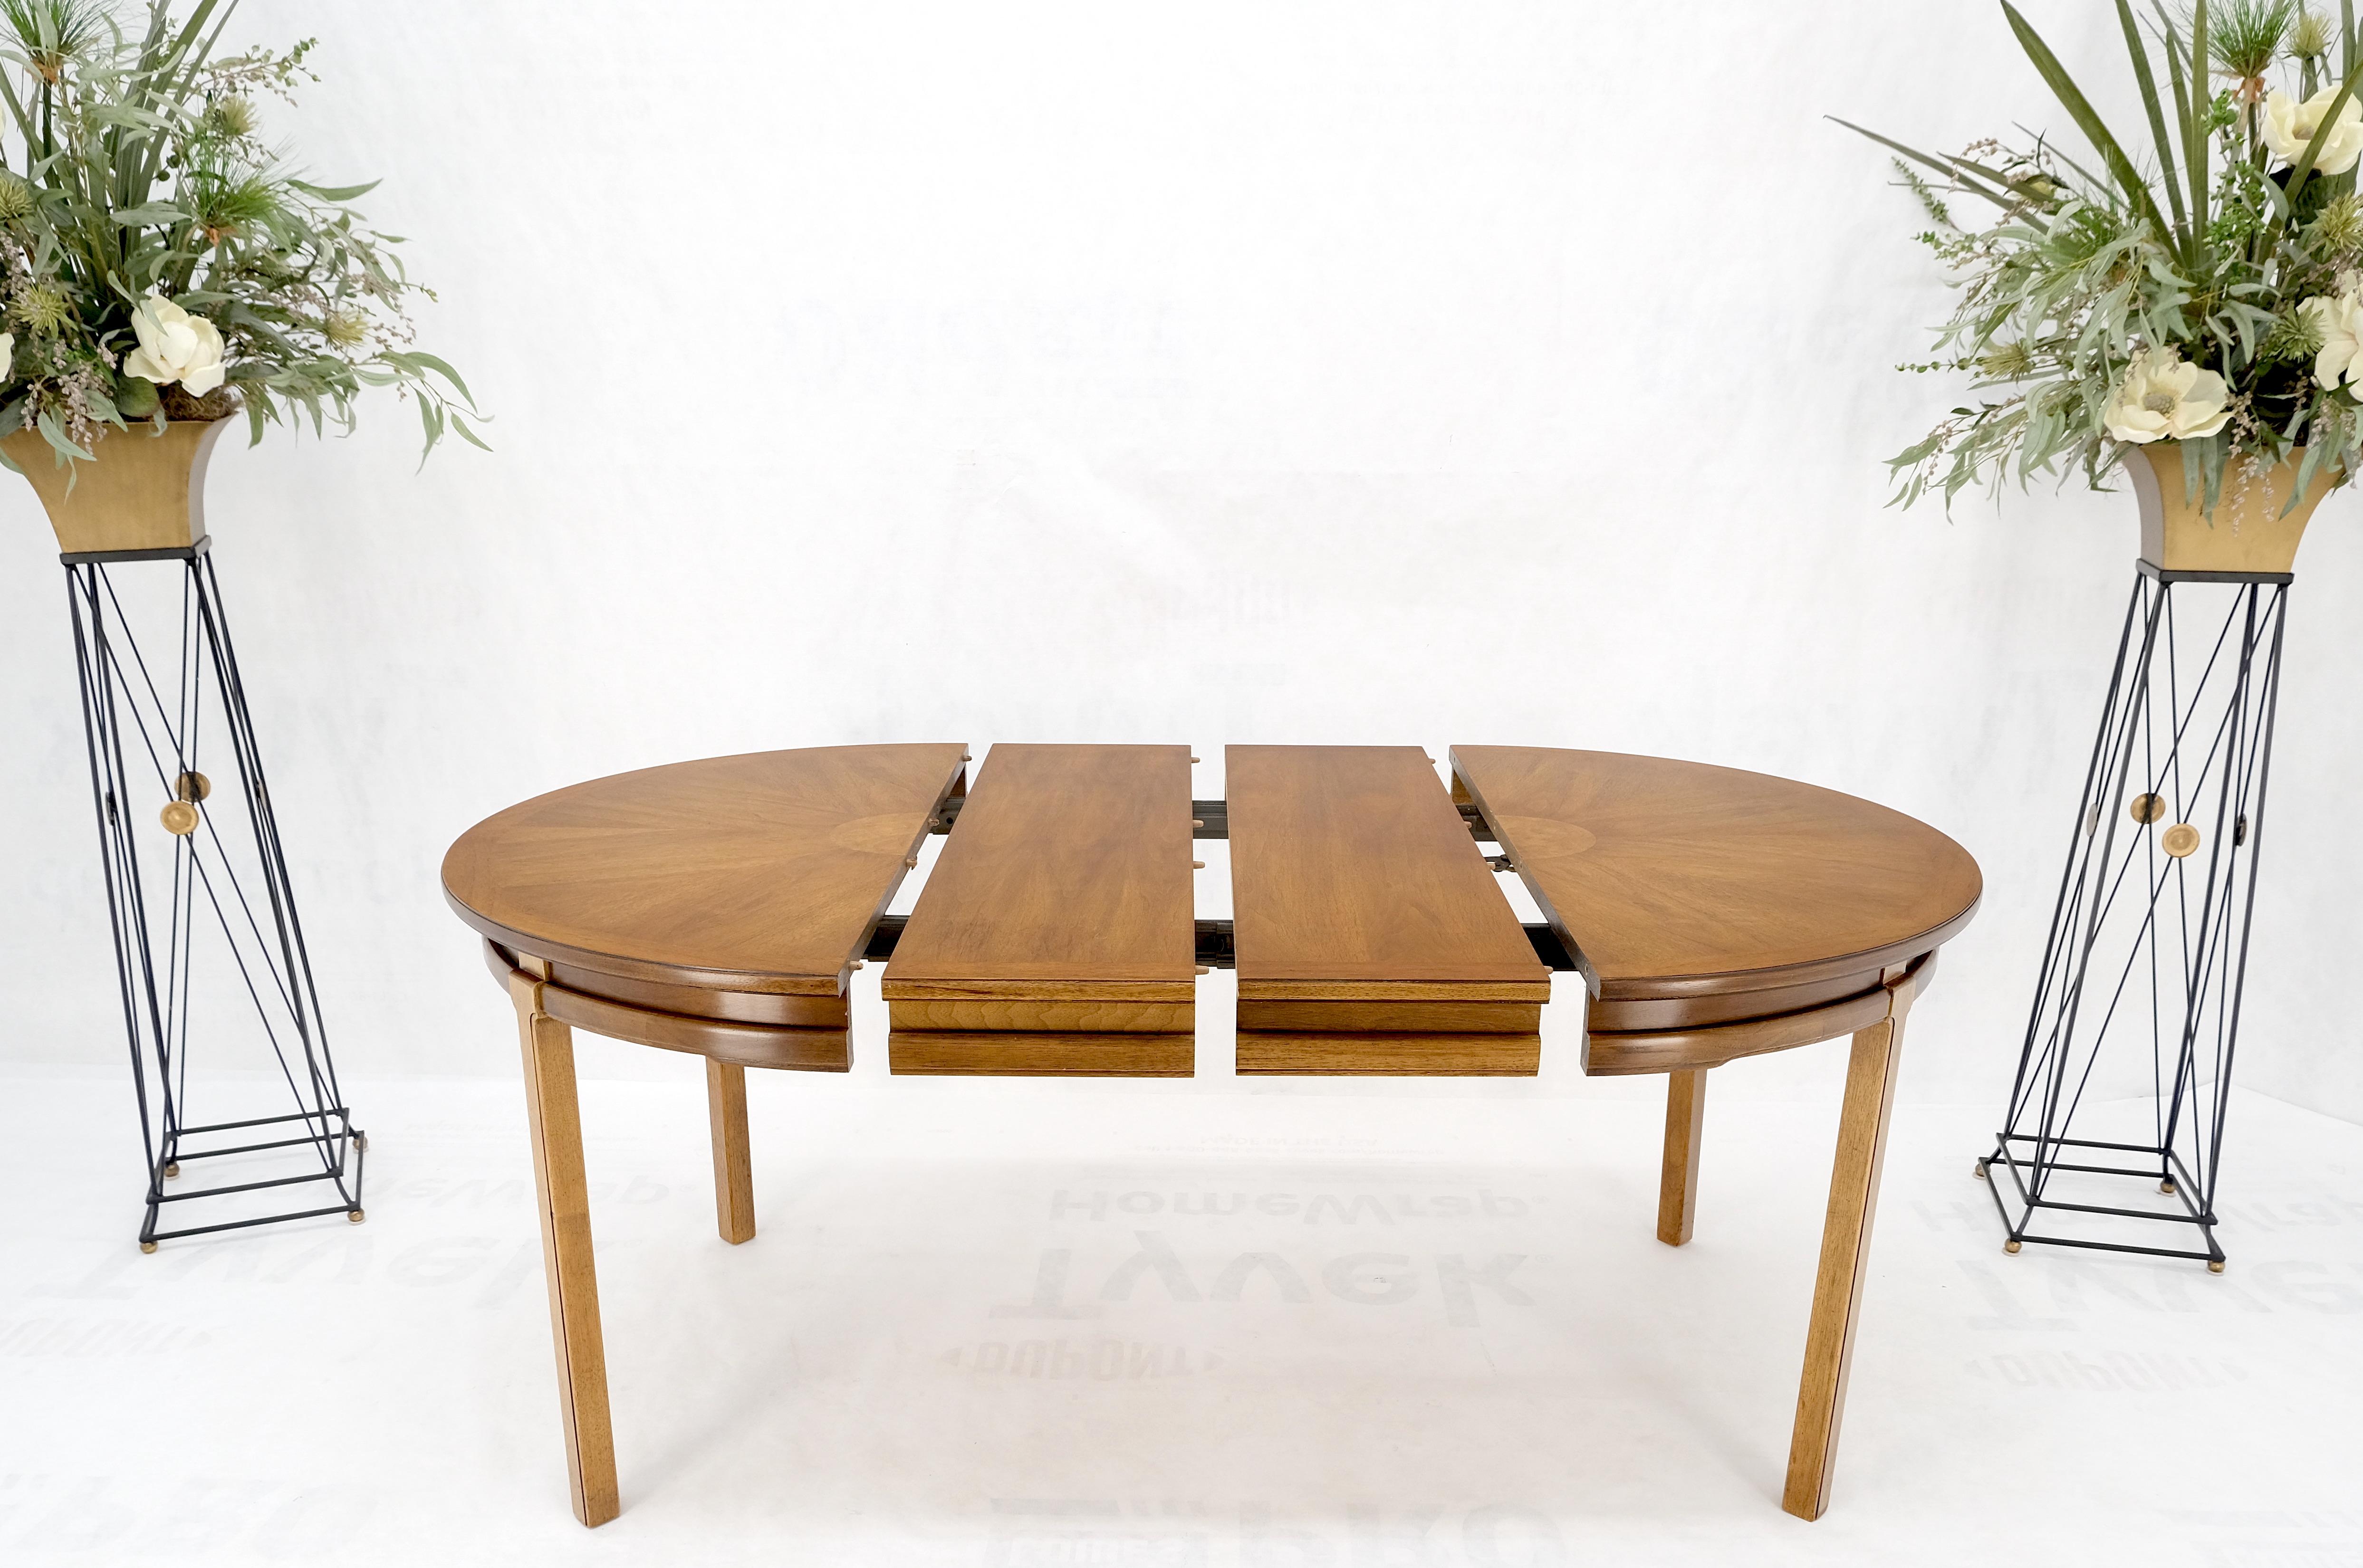 American Round Sunburst Pattern Mid-Century Modern Dining Table with Two Leaves Mint For Sale